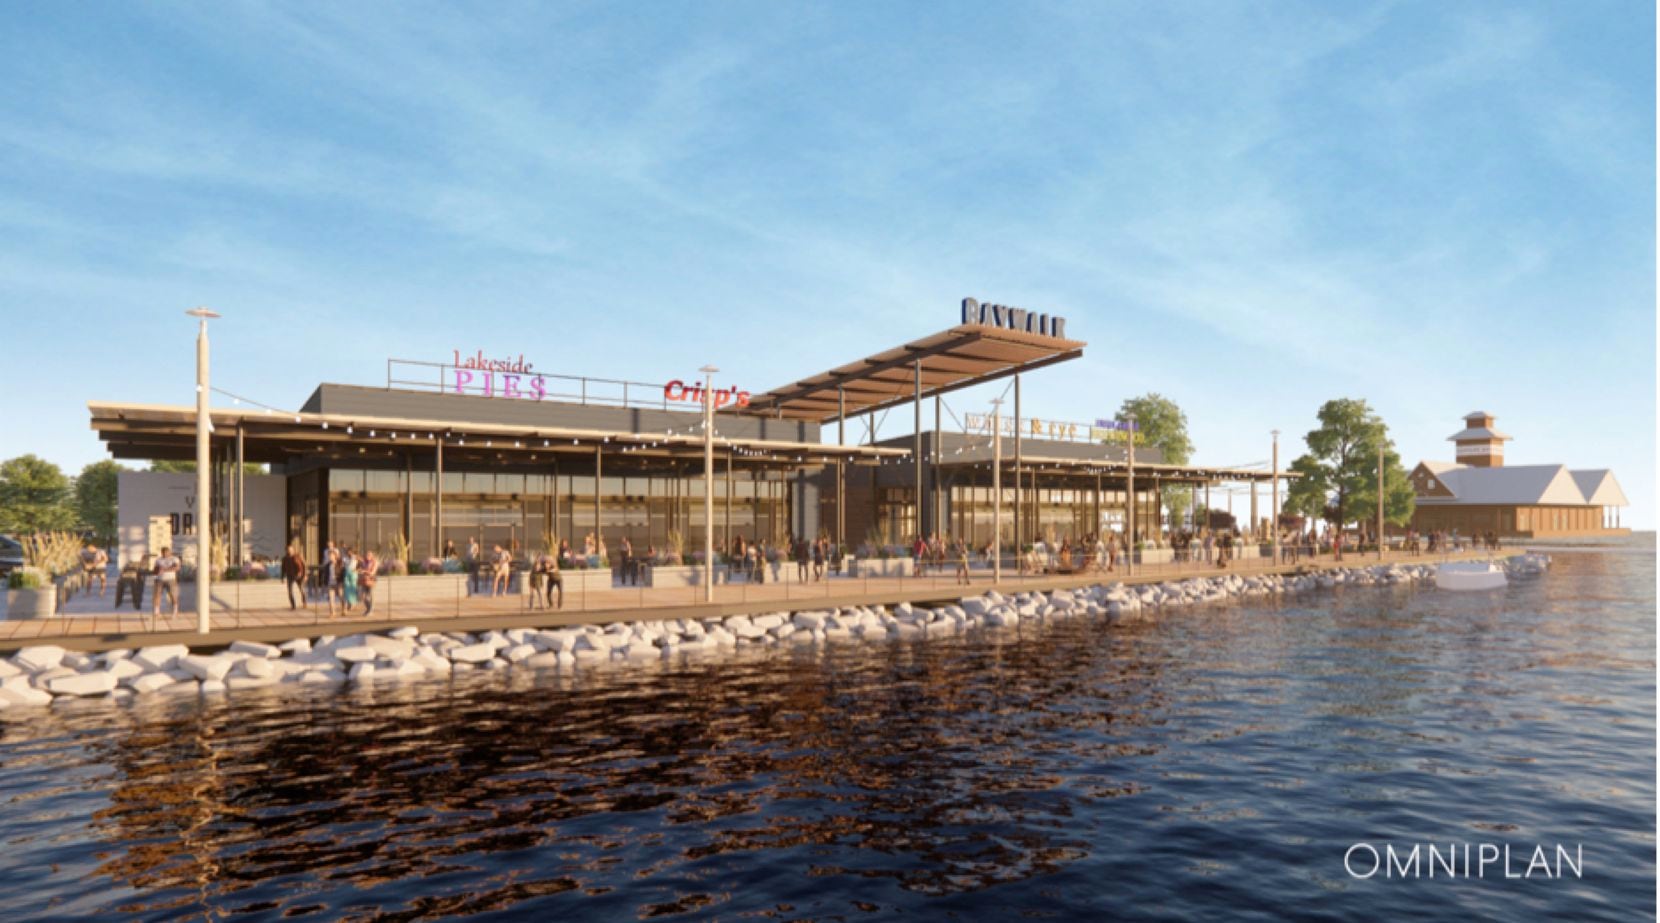 The Baywalk restaurant center will join a refurbished and expanded marina in Rowlett.